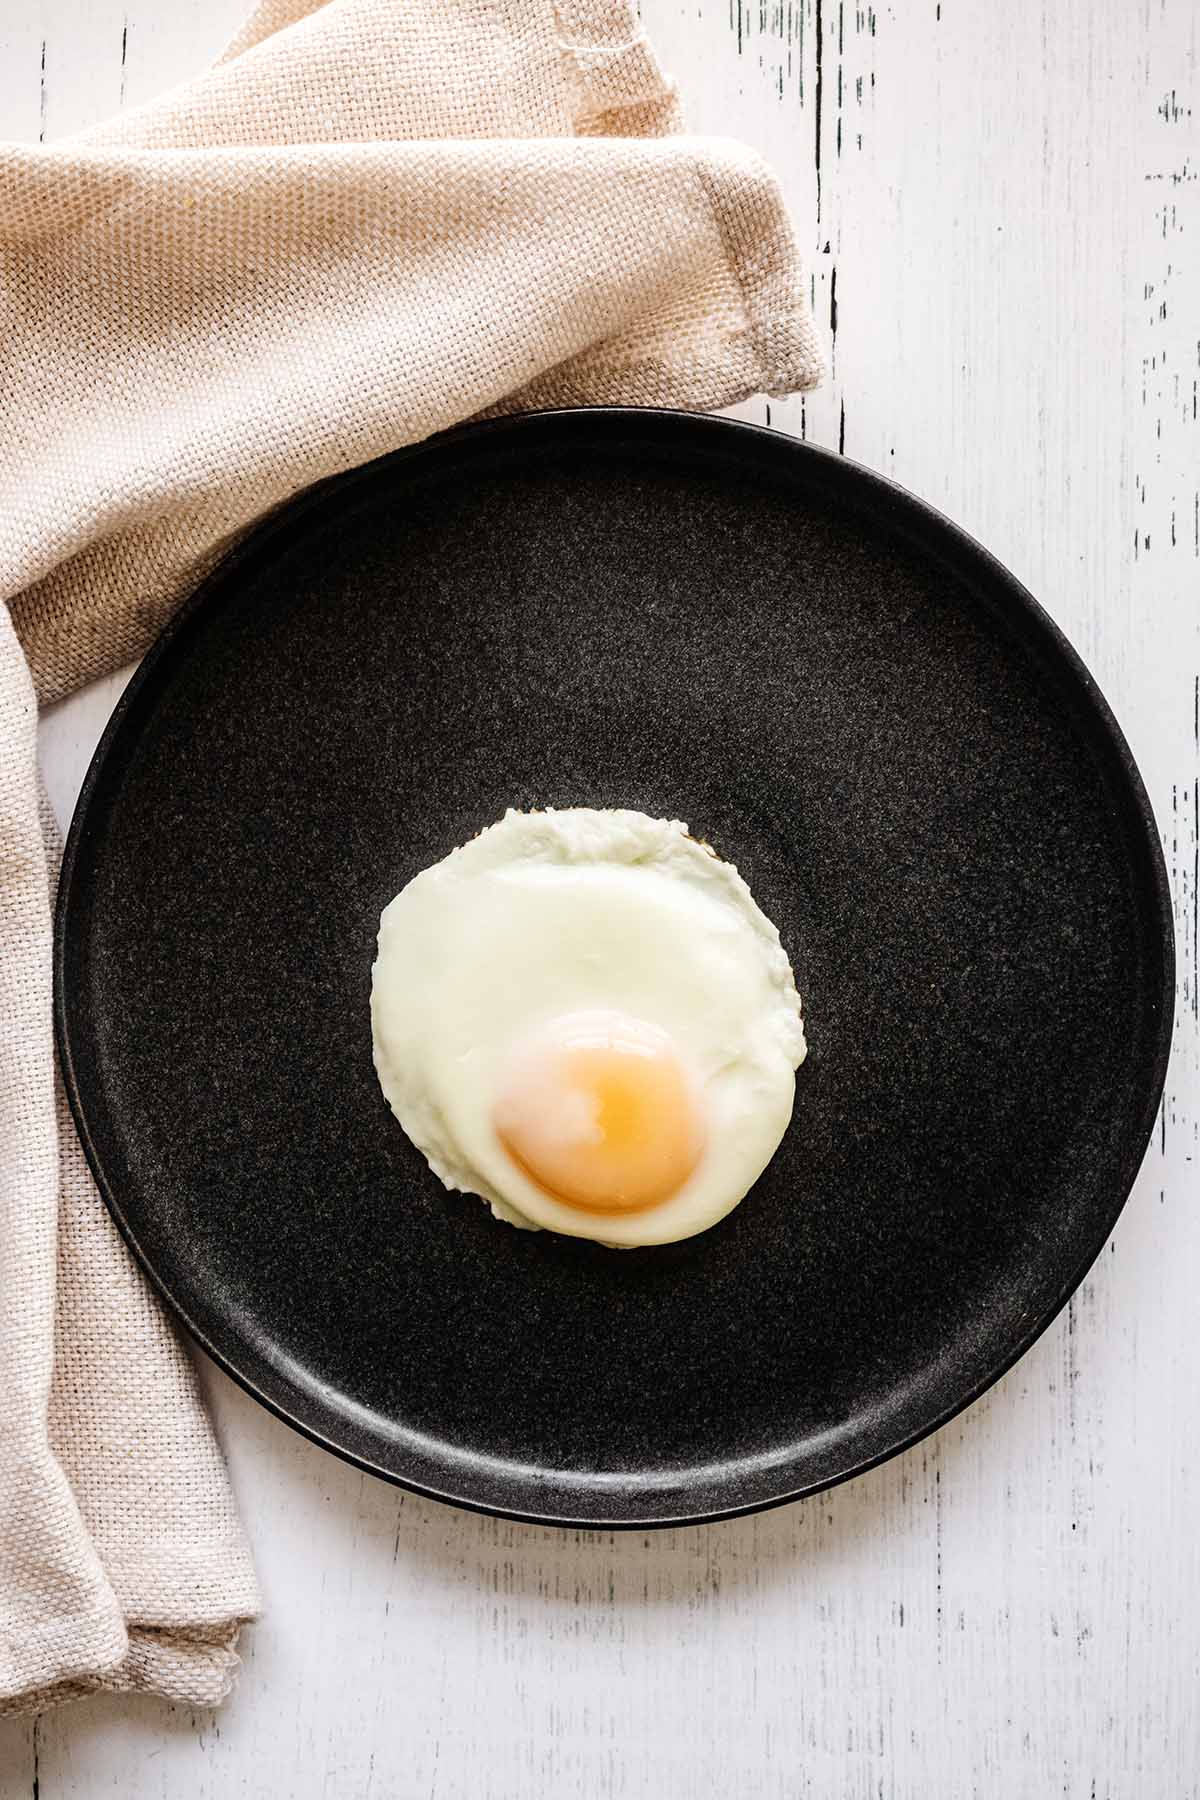 Basted egg on a dark grey plate with a beige napkin.